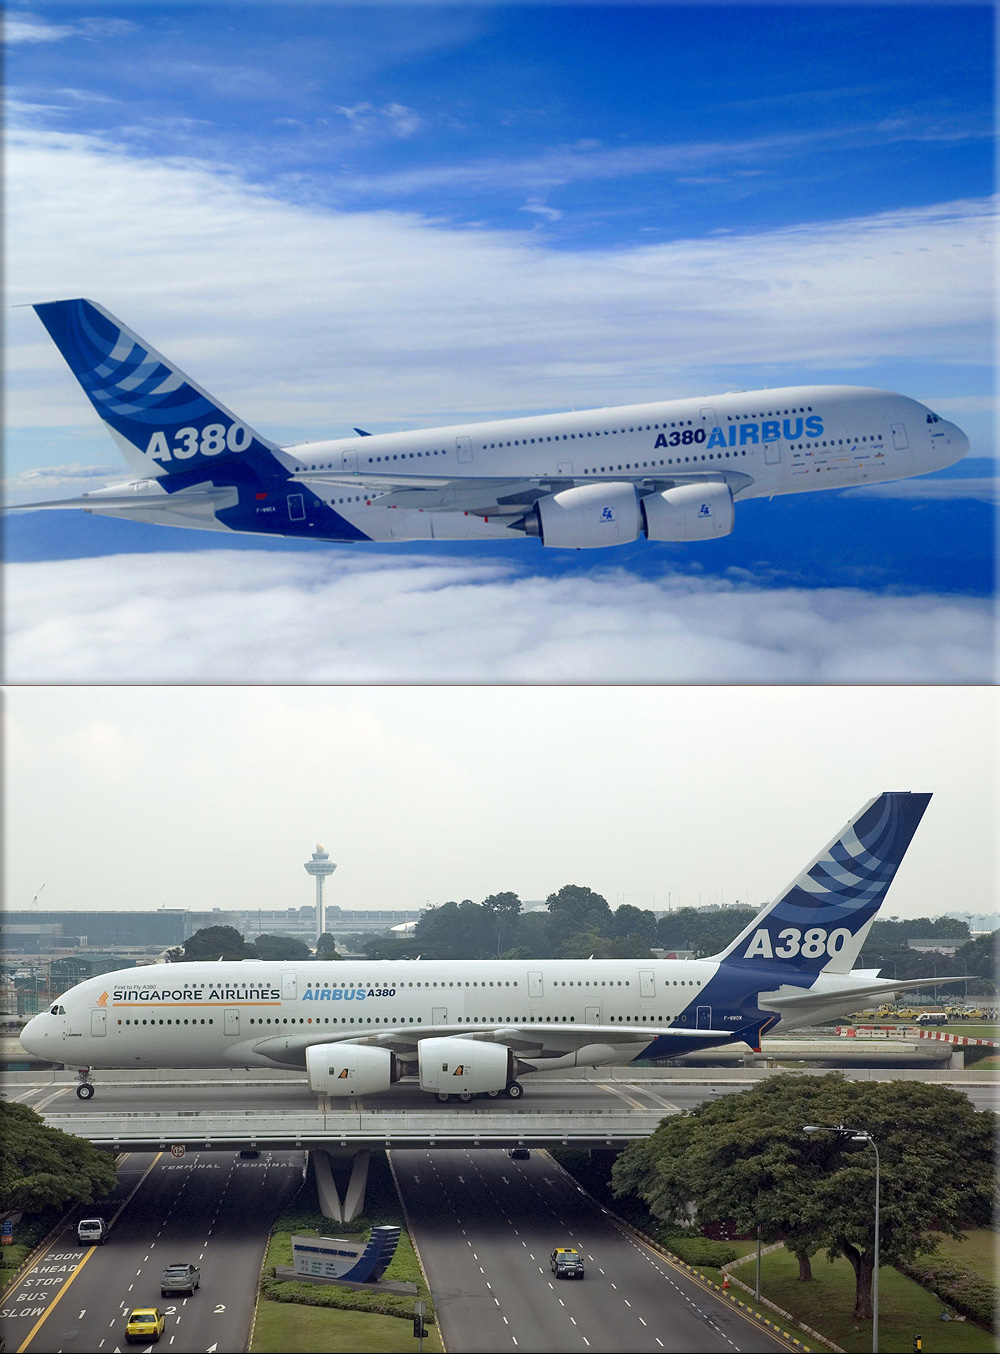 The Airbus A380, the world's largest commercial jet, is unveiled at a ceremony in Toulouse, France